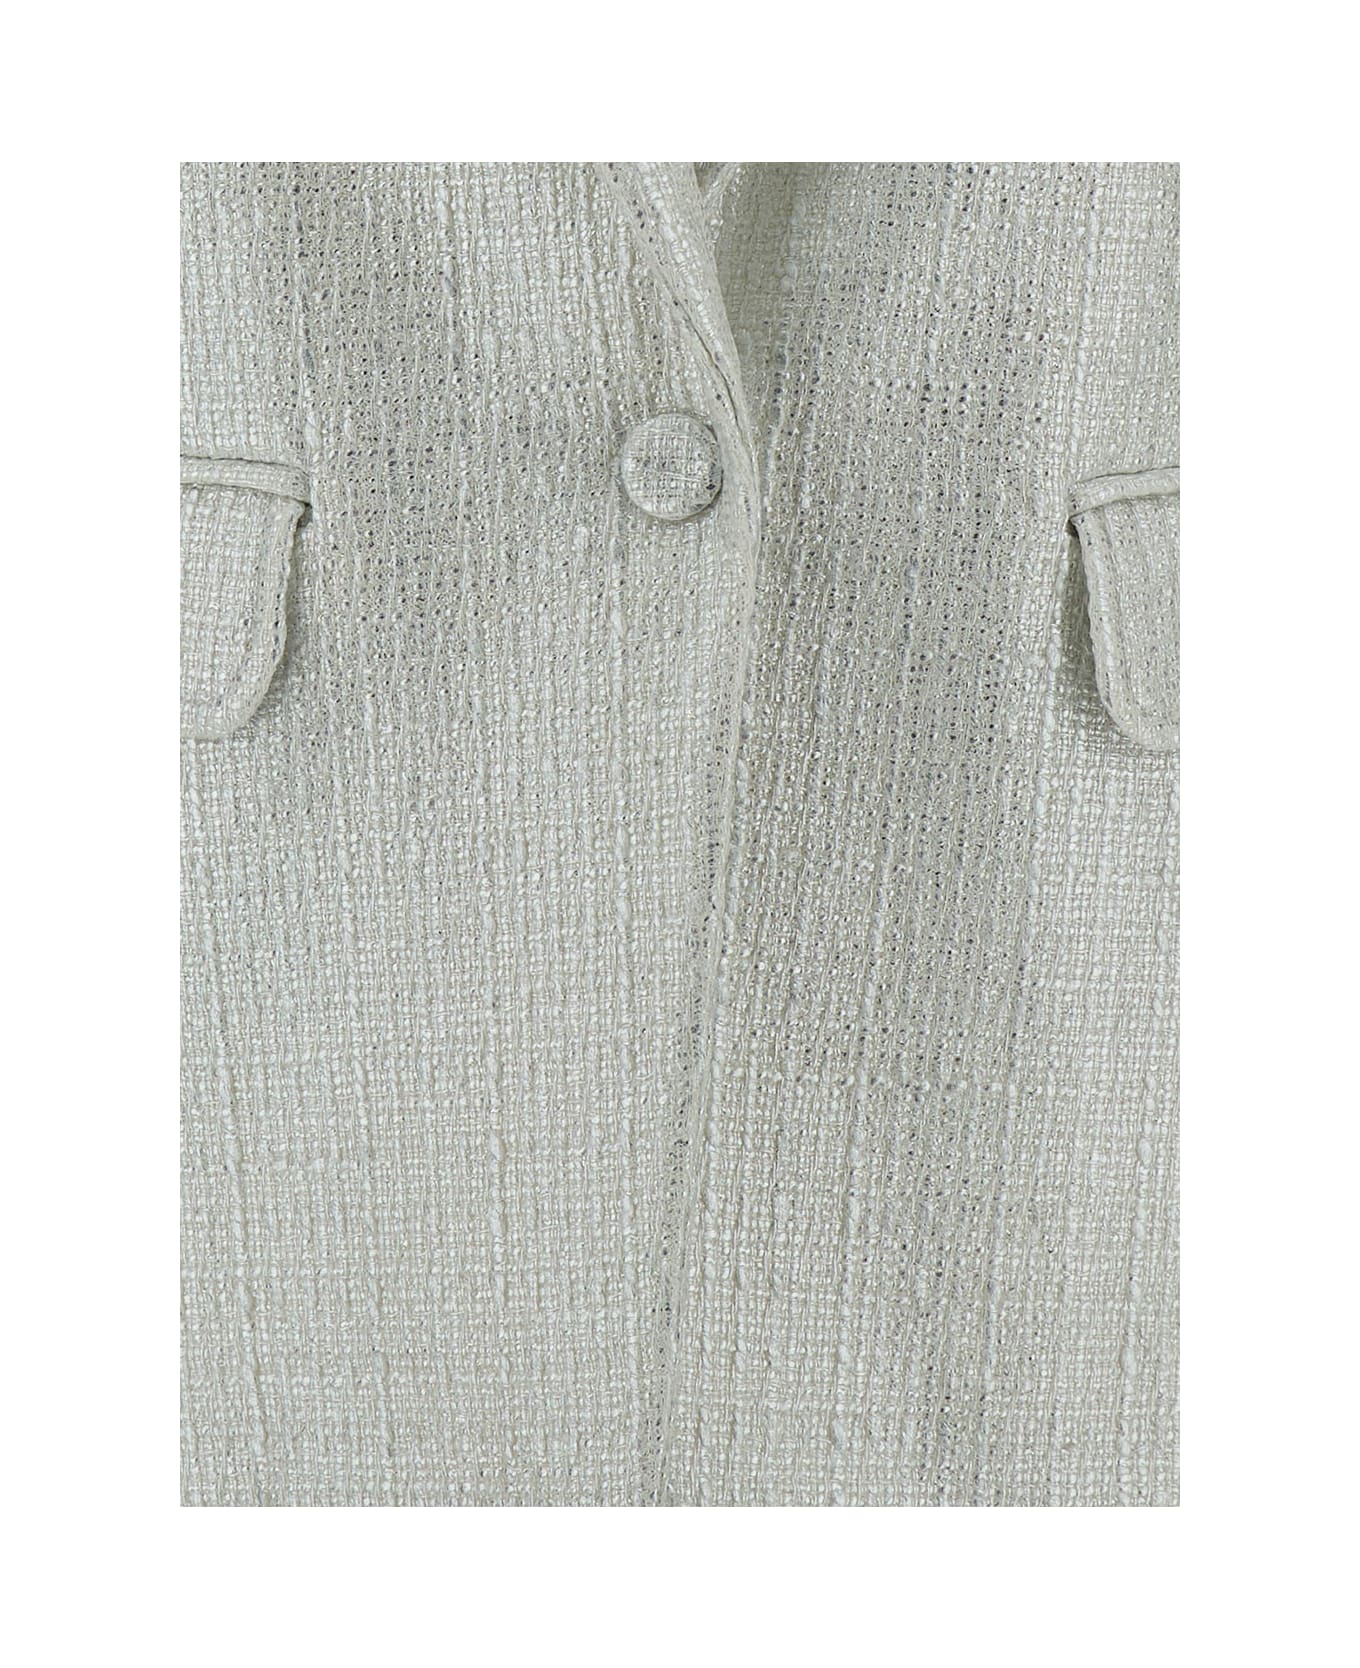 Federica Tosi Silver Single-breasted Jacket With A Single Button In Cotton Blend Man - Metallic